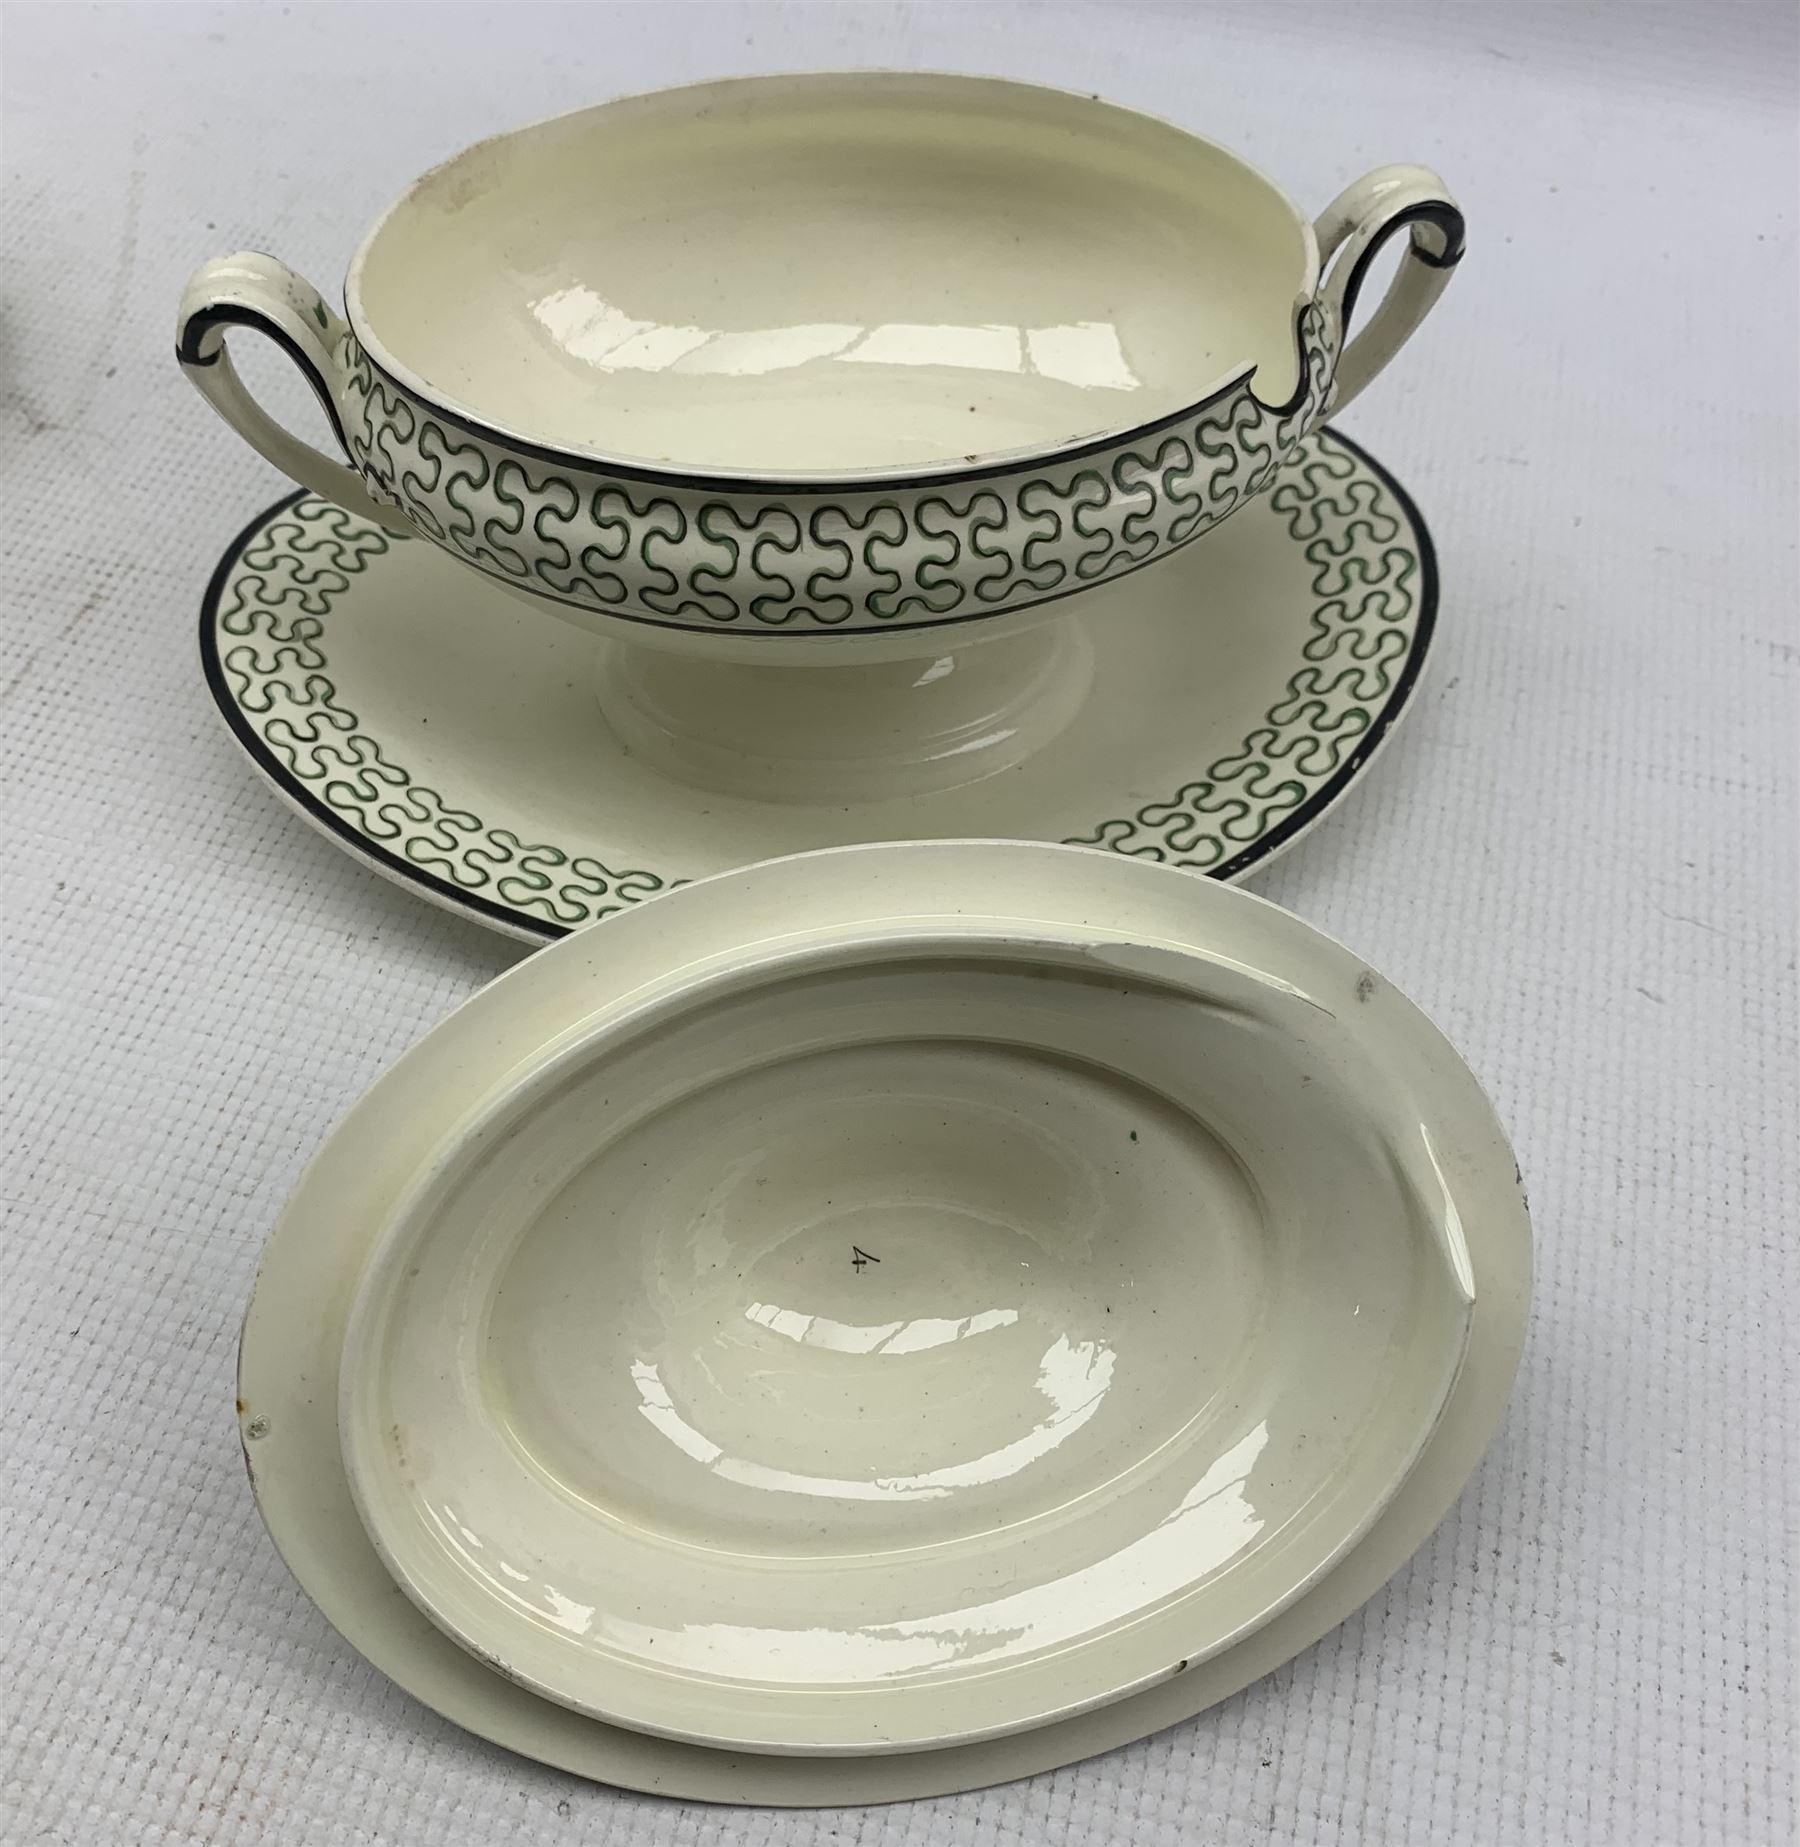 Pair of late 18th century Wedgwood Creamware sauce tureens and oval dish c1790 - Image 4 of 4